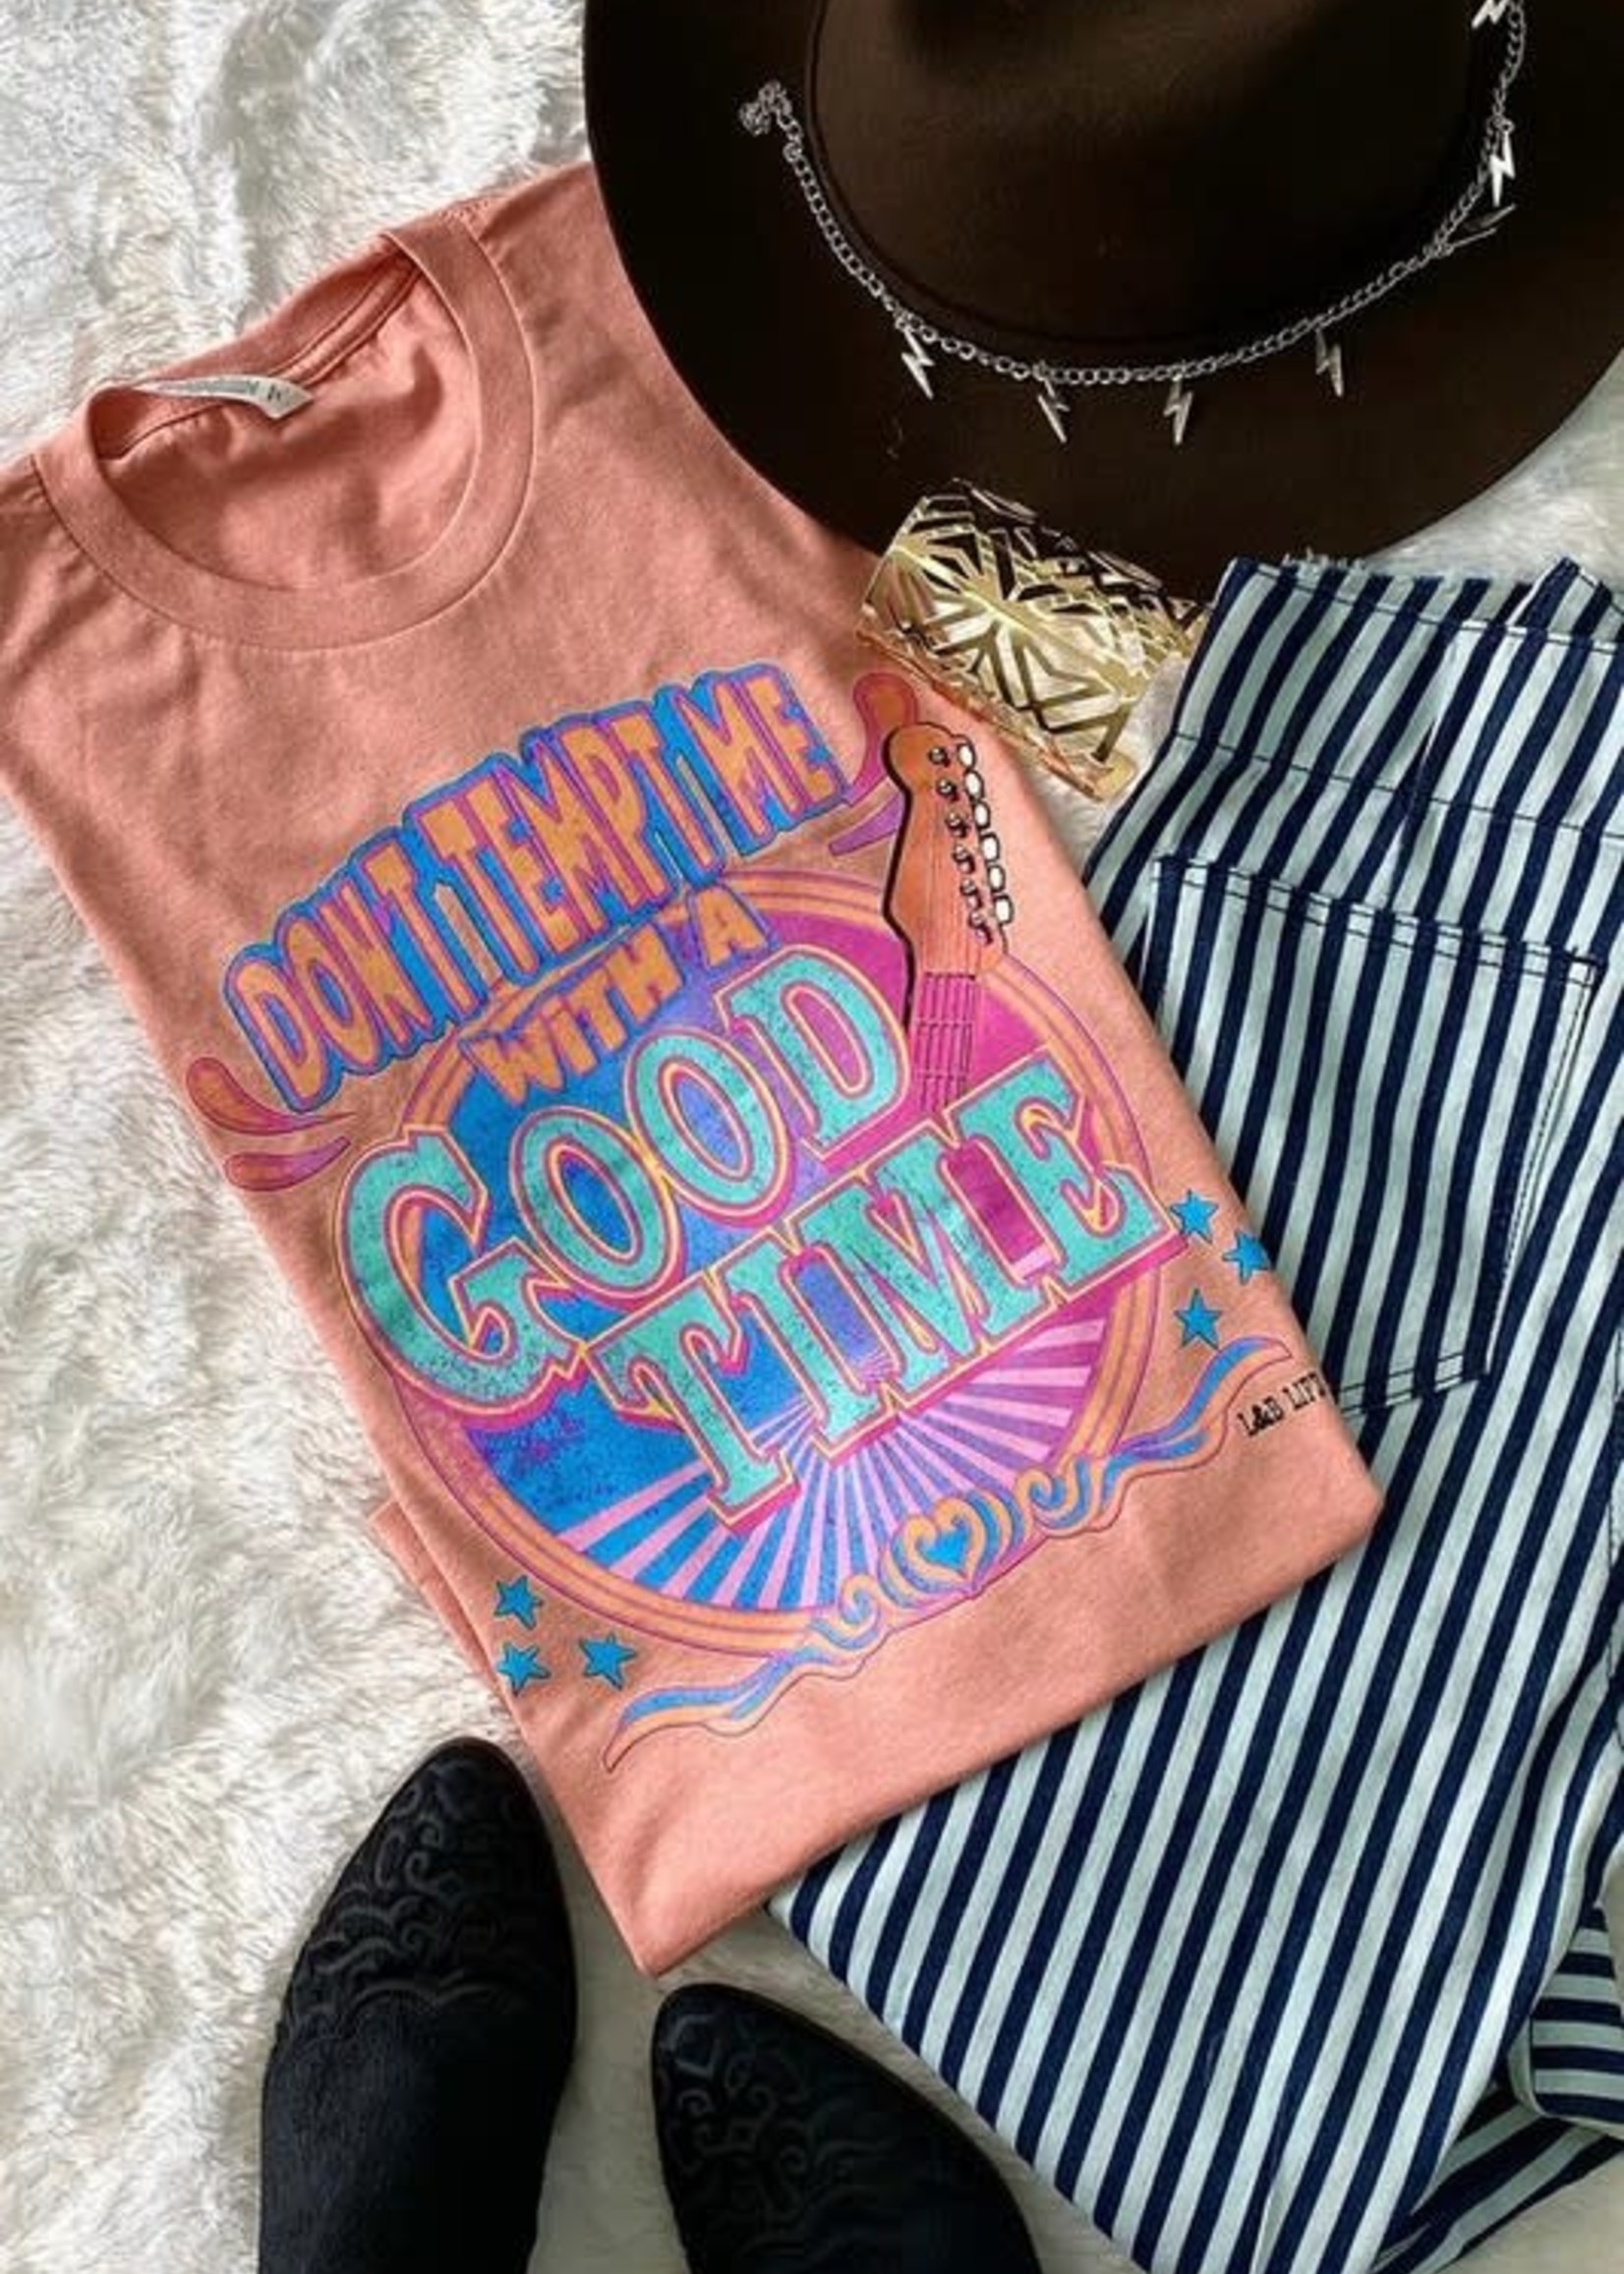 Don't Tempt Me with a Good Time Tee